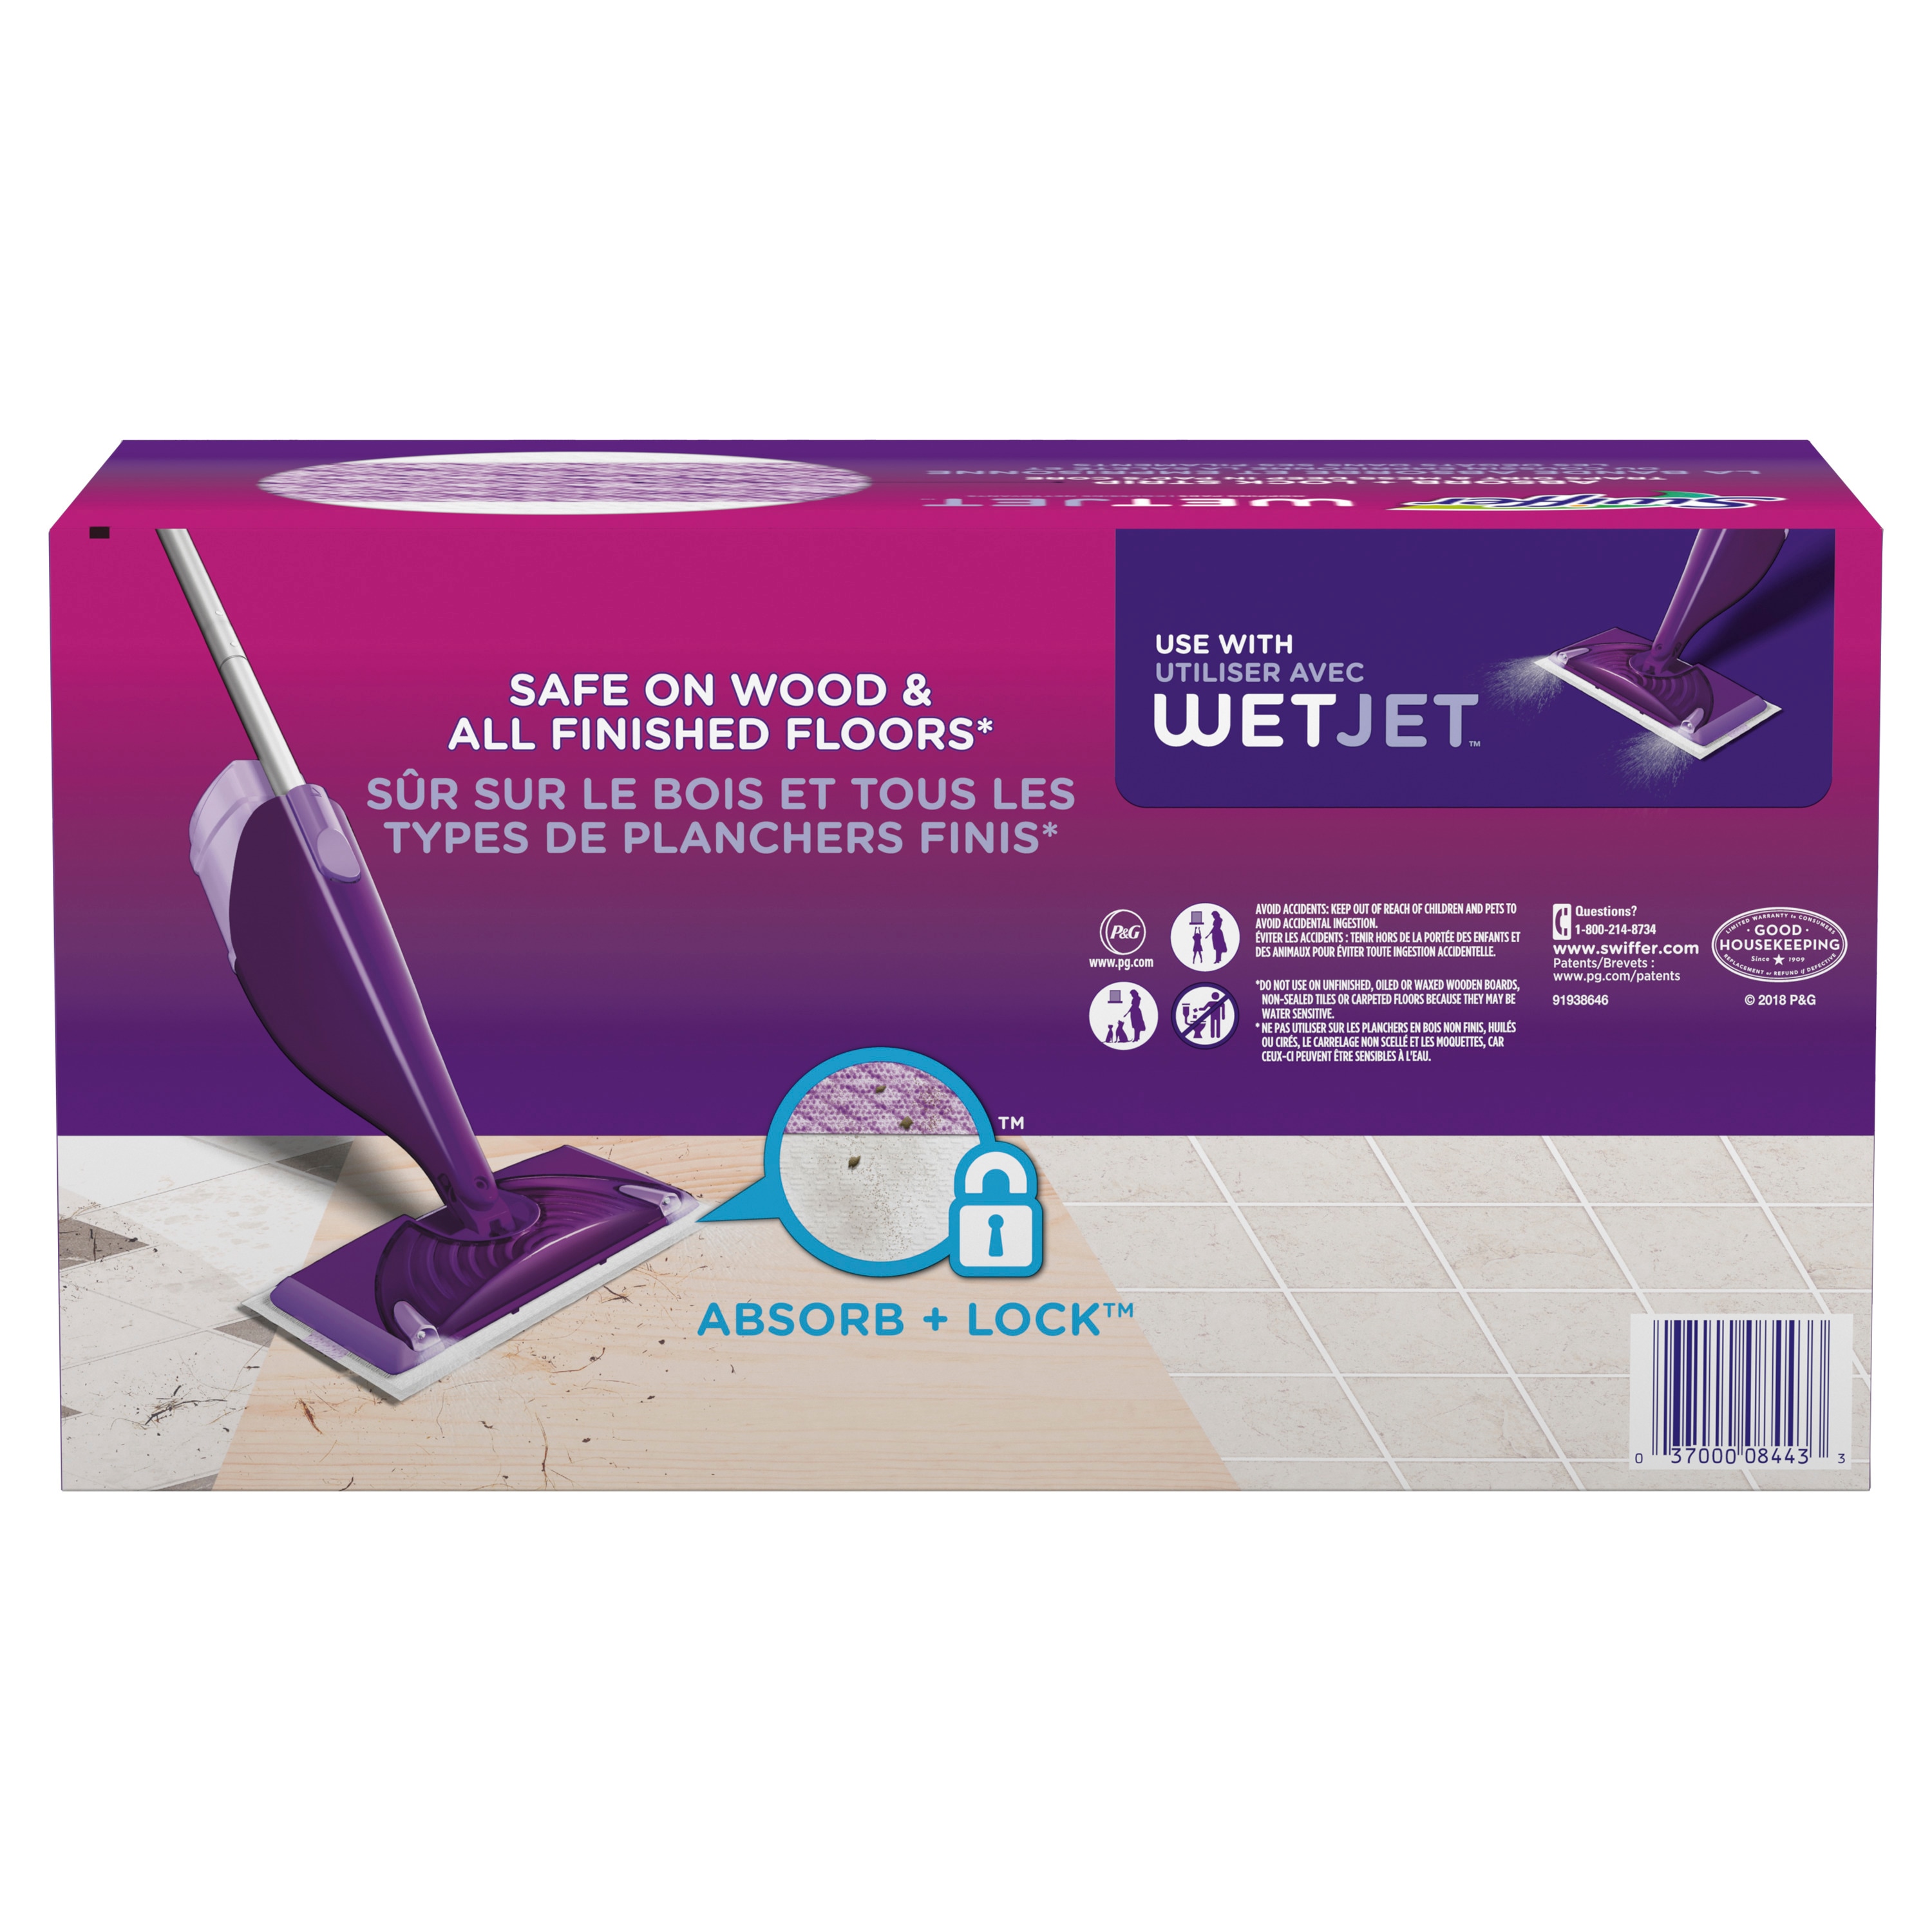 Swiffer Wet Jet Mopping Kit - Bel Air Store Limited